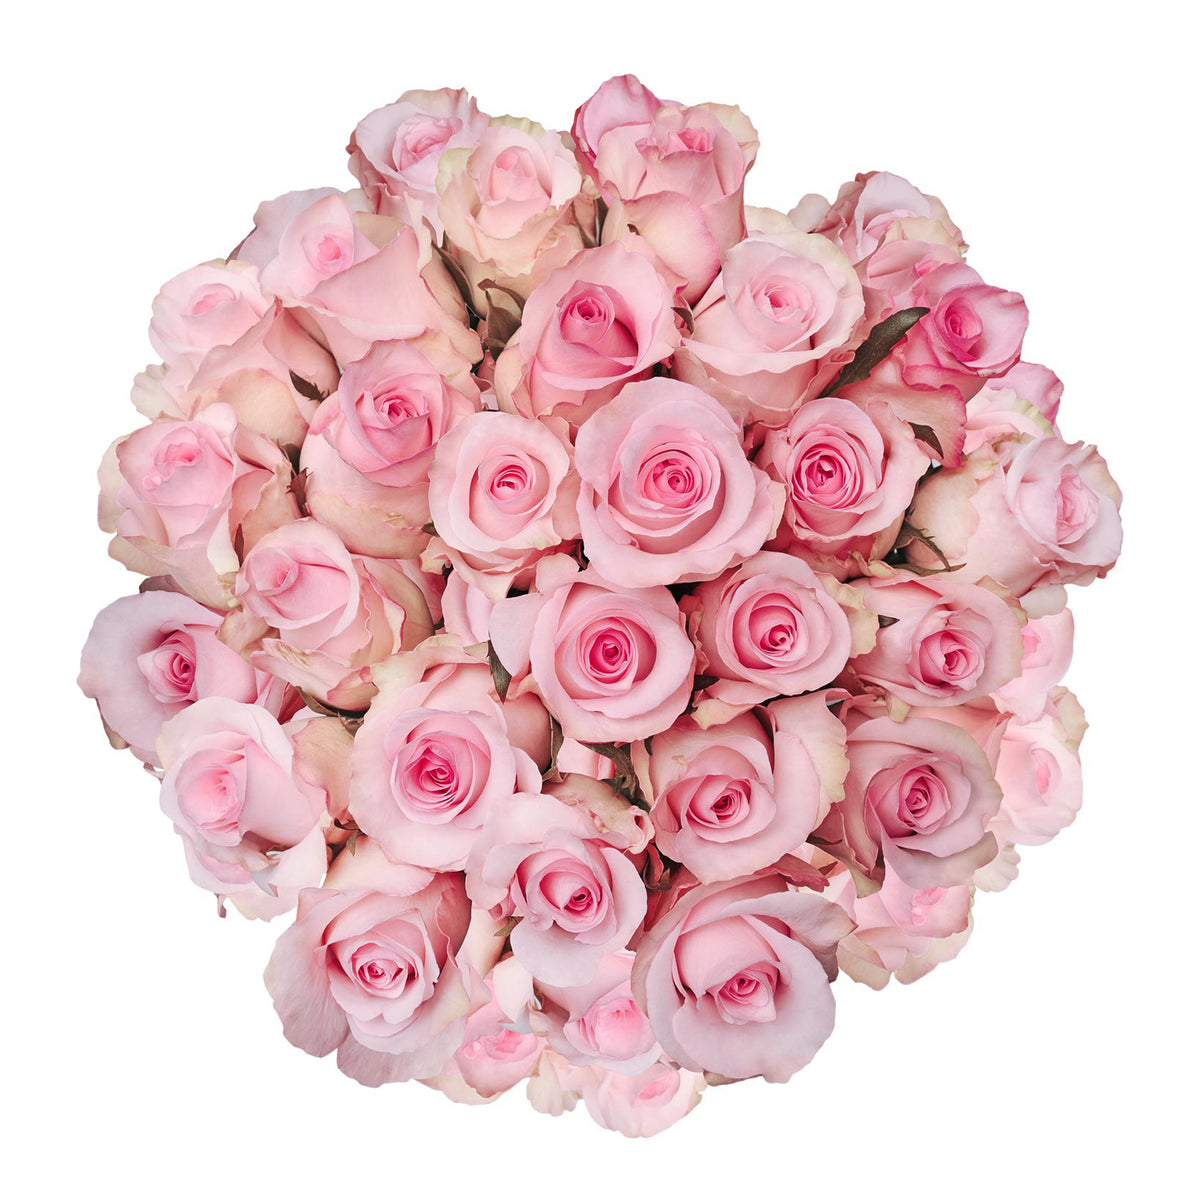 Premium Photo  Close up of a beautiful bouquet of pink roses with